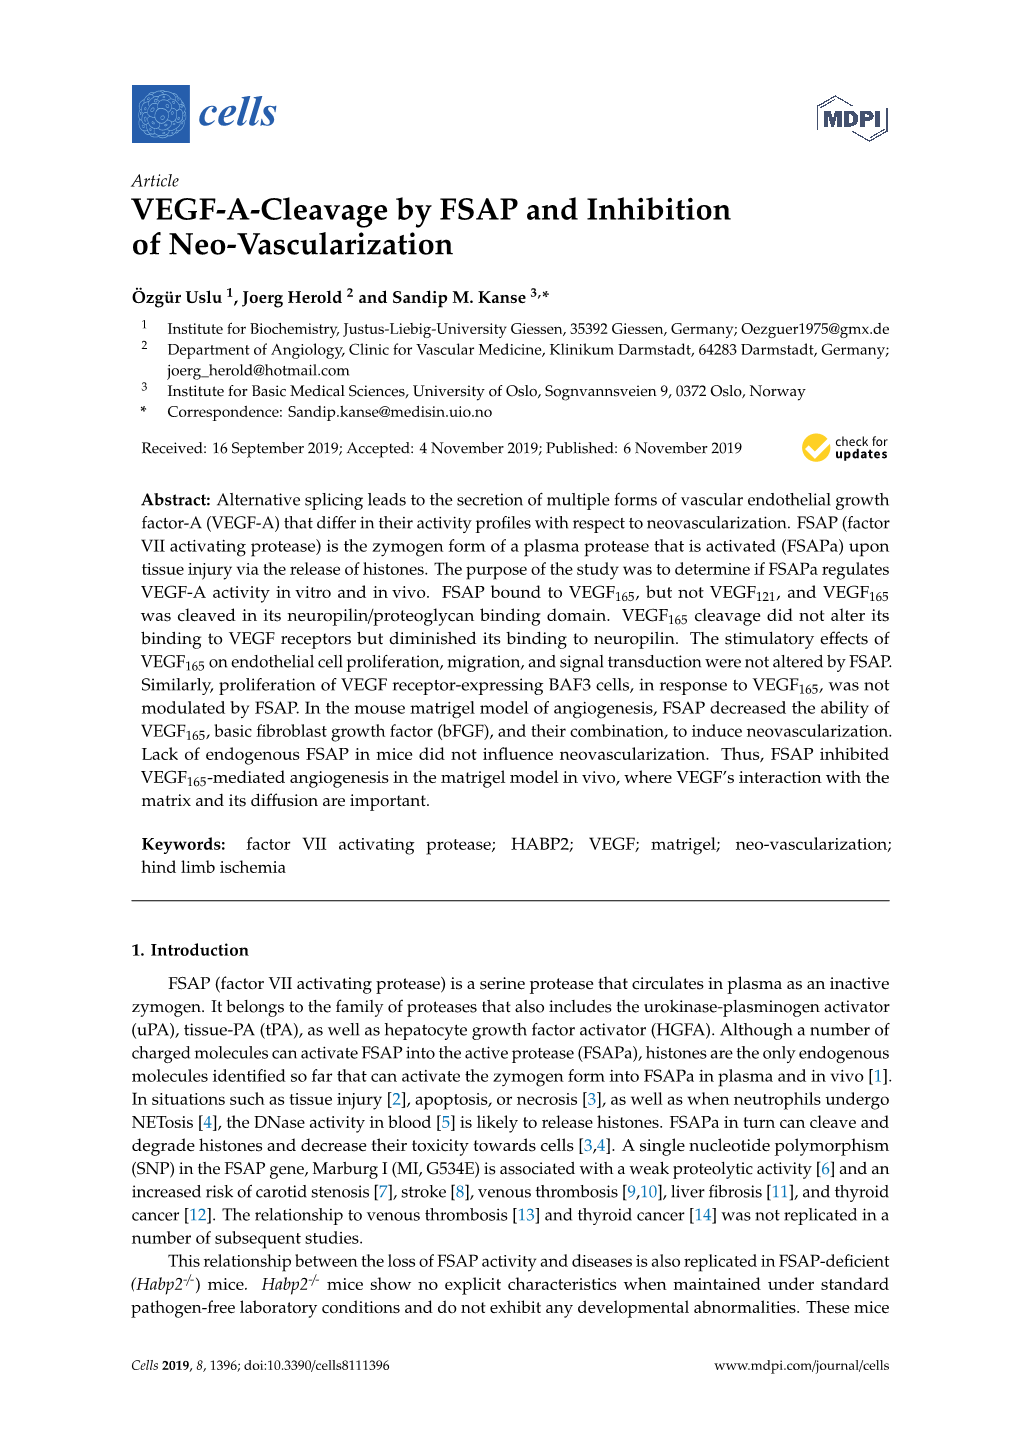 VEGF-A-Cleavage by FSAP and Inhibition of Neo-Vascularization